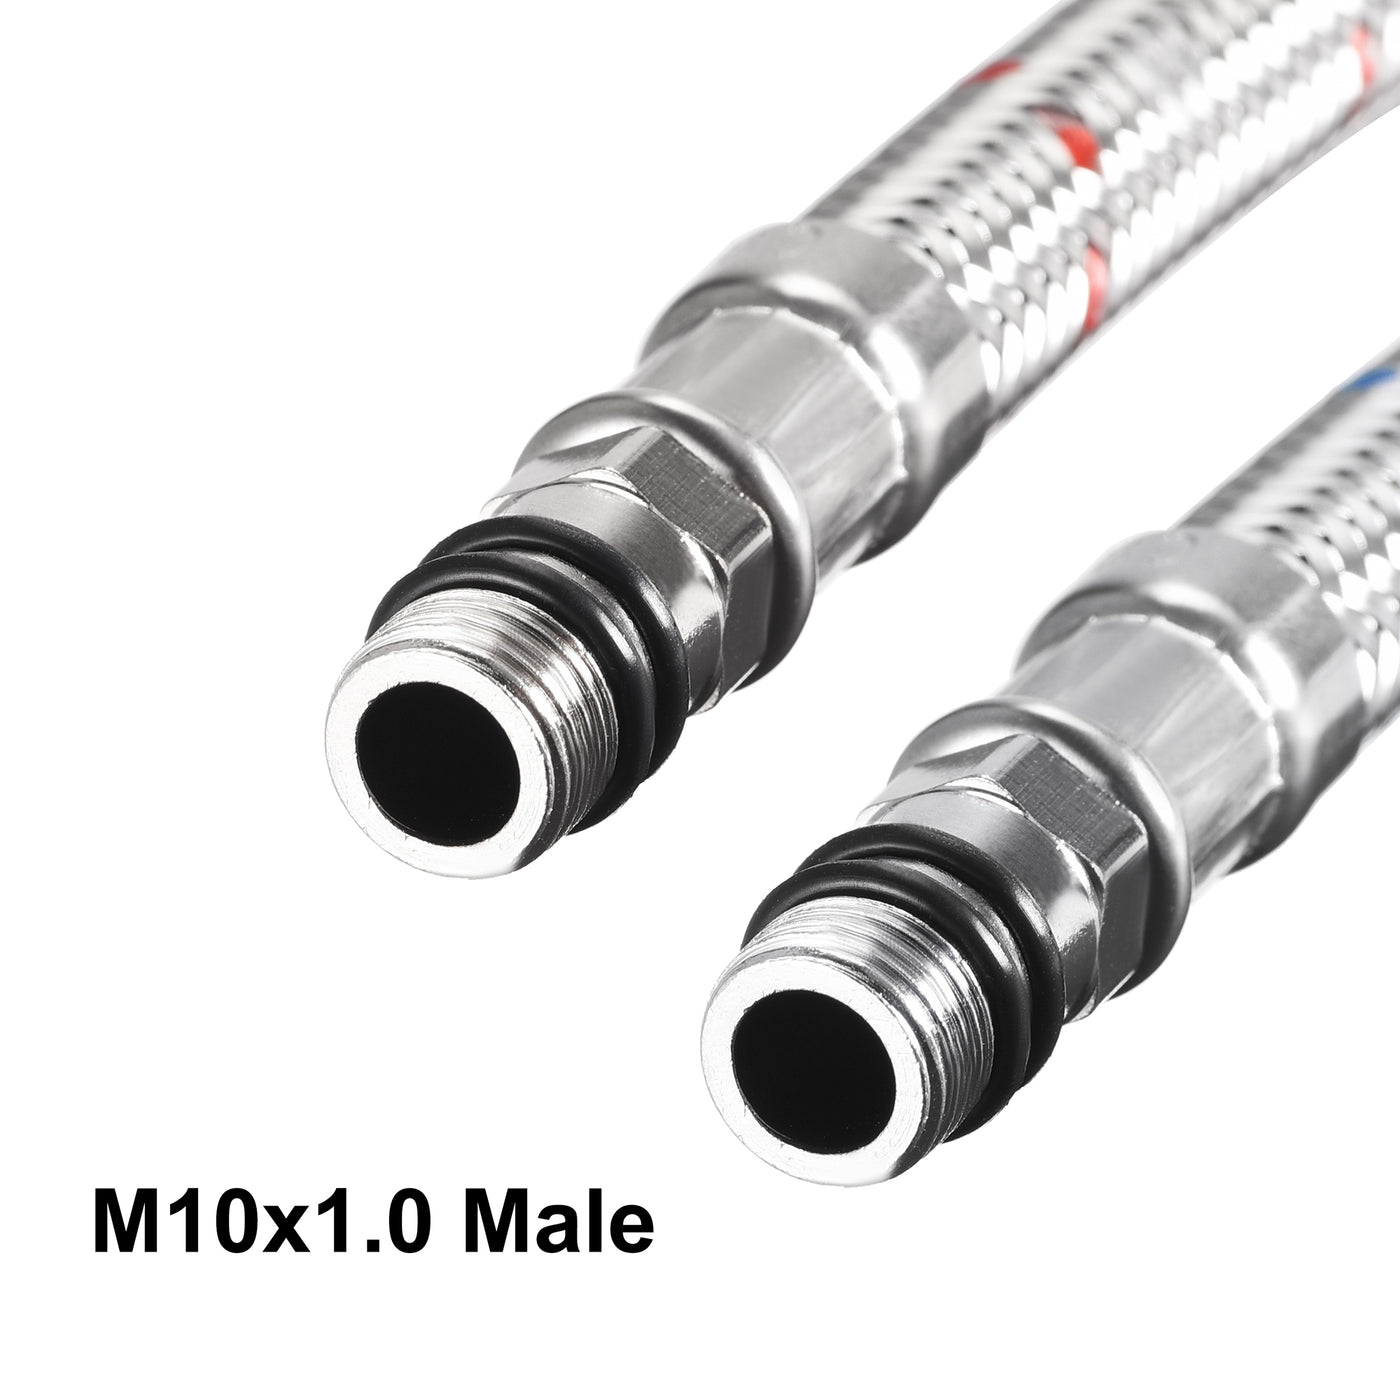 uxcell Uxcell Faucet Supply Hose Connector G1/2 Female x M10x1.0 Male 31 Inch Length 304 Stainless Steel Hose 1set